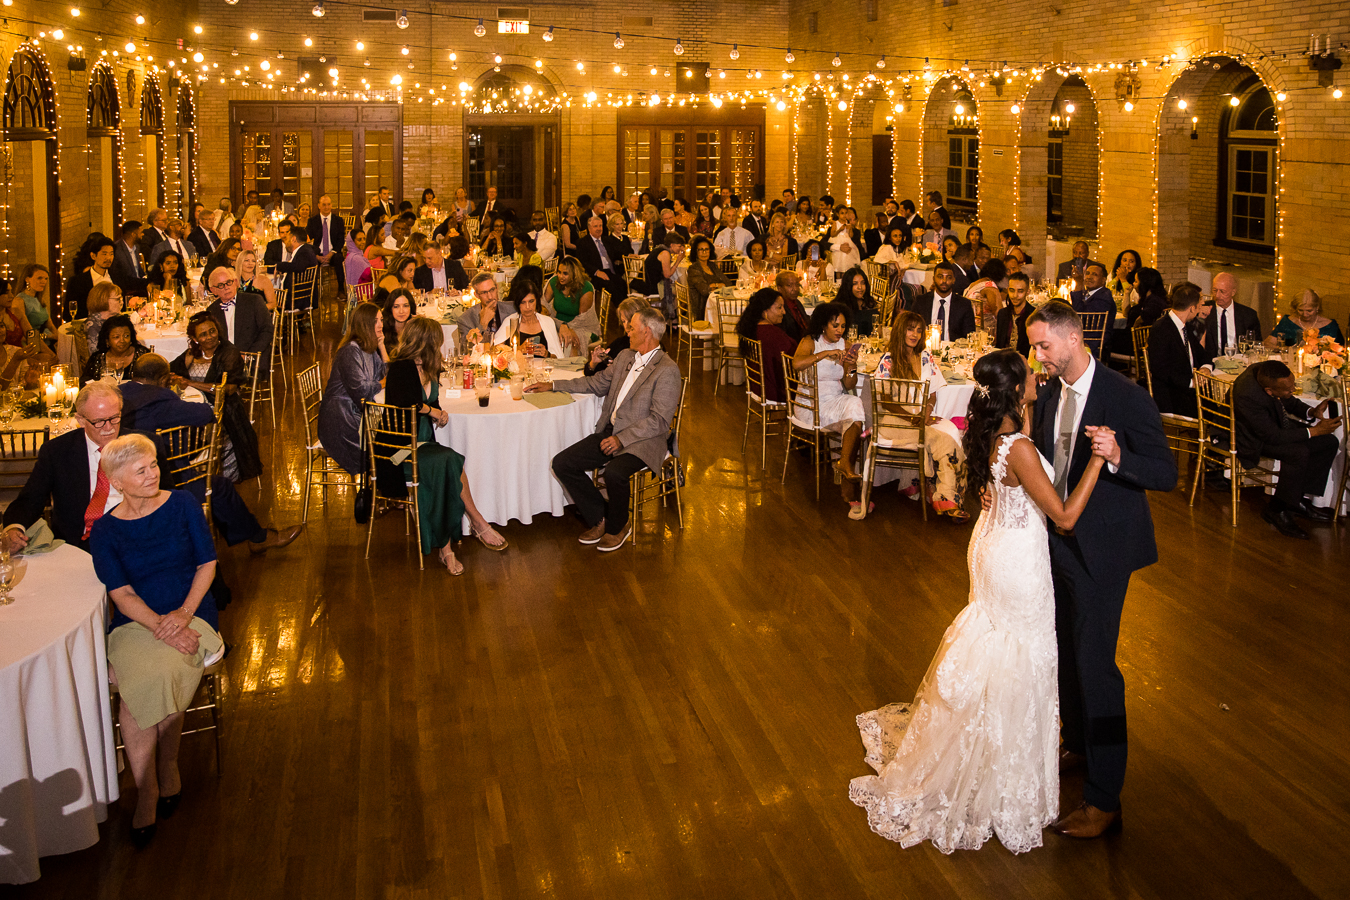 dc wedding photographer, lisa rhinehart, captures this image of the groom and his ethiopian bride as they share their first dance together during their multicultural st francis hall wedding reception in dc 